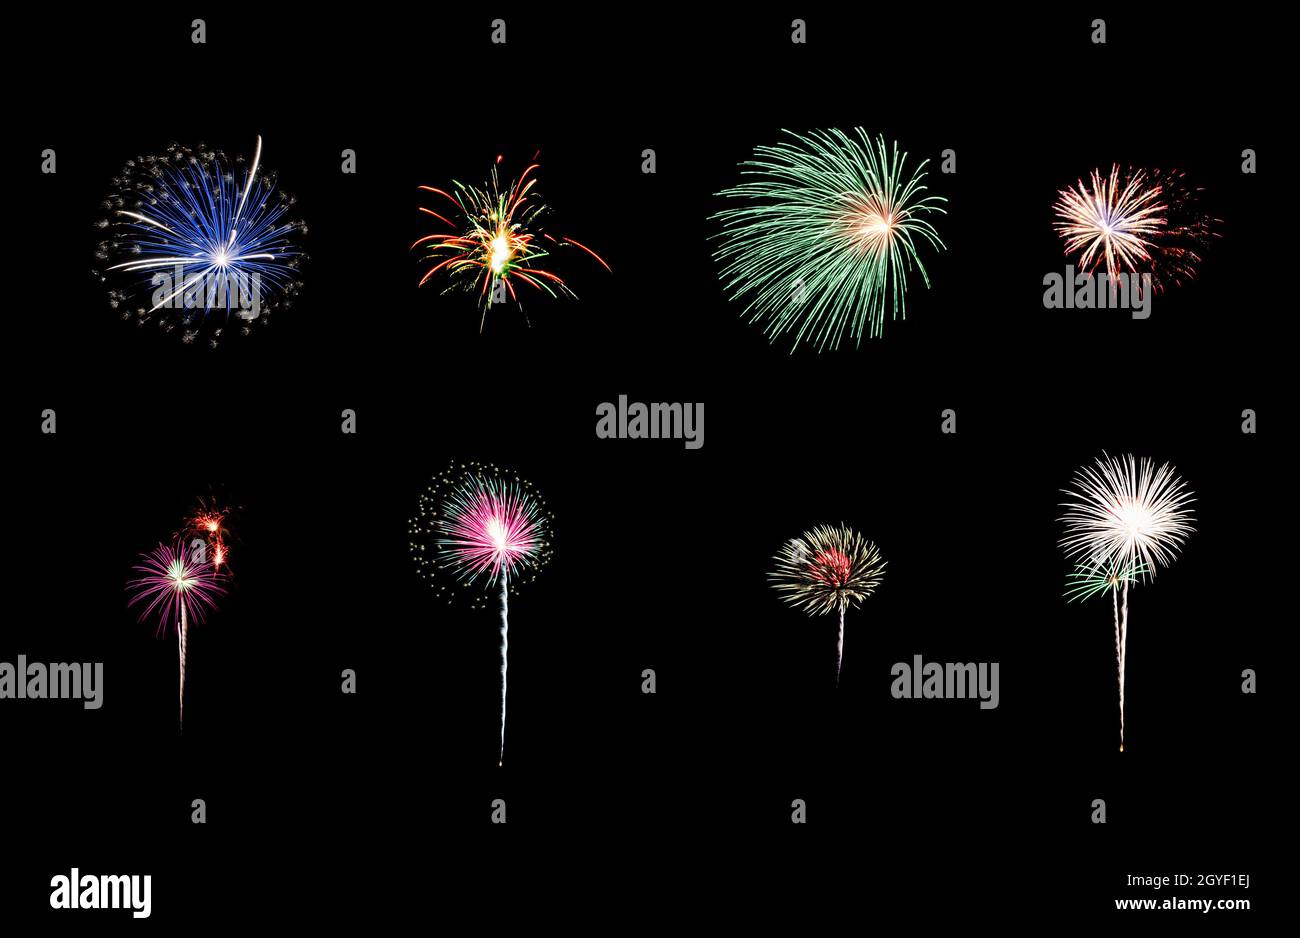 Collection of colorful festive eight fireworks exploding over night sky, isolated on black background Stock Photo